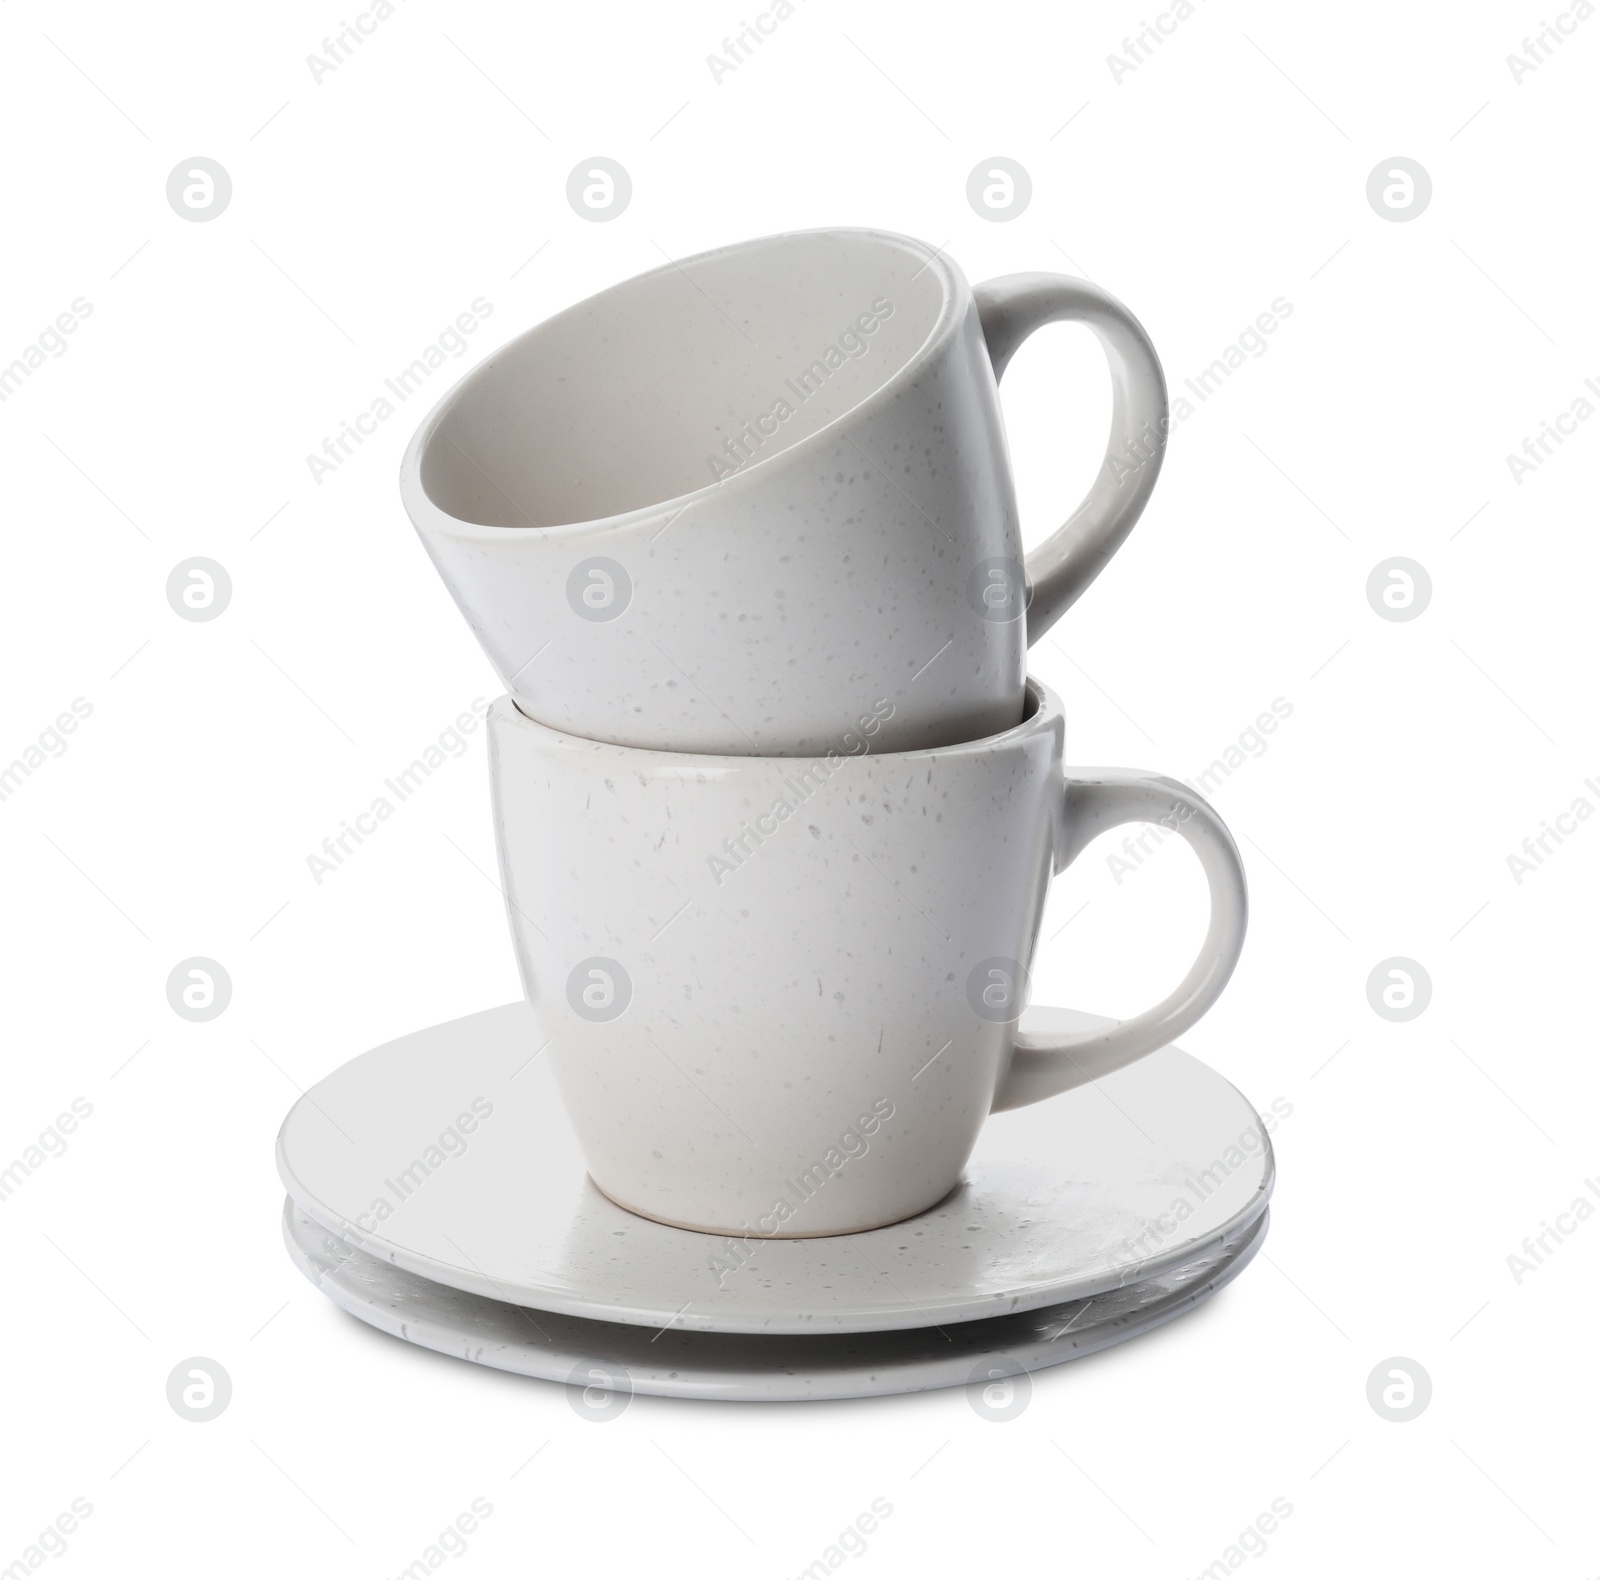 Photo of New clean ceramic cups and saucers on white background